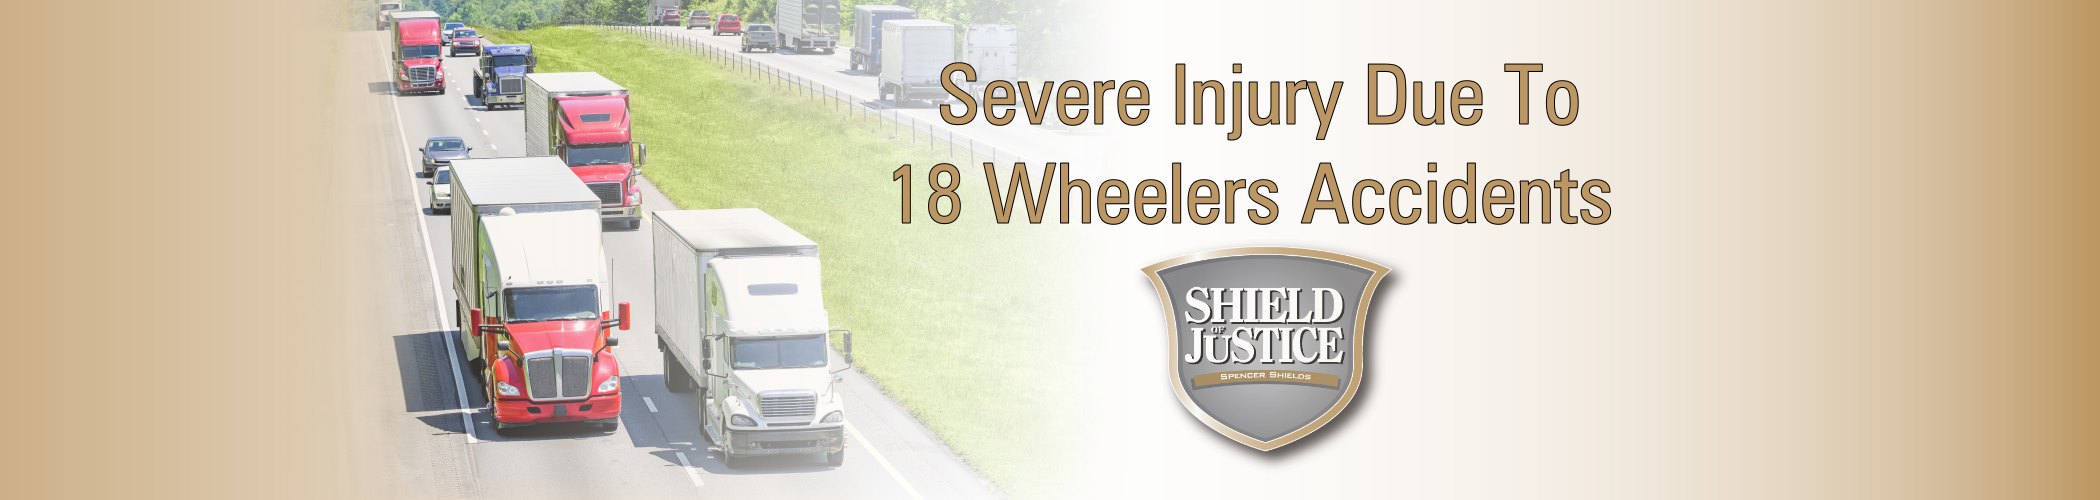 Injuries due to 18 Wheelers - Attorney Spencer Shields